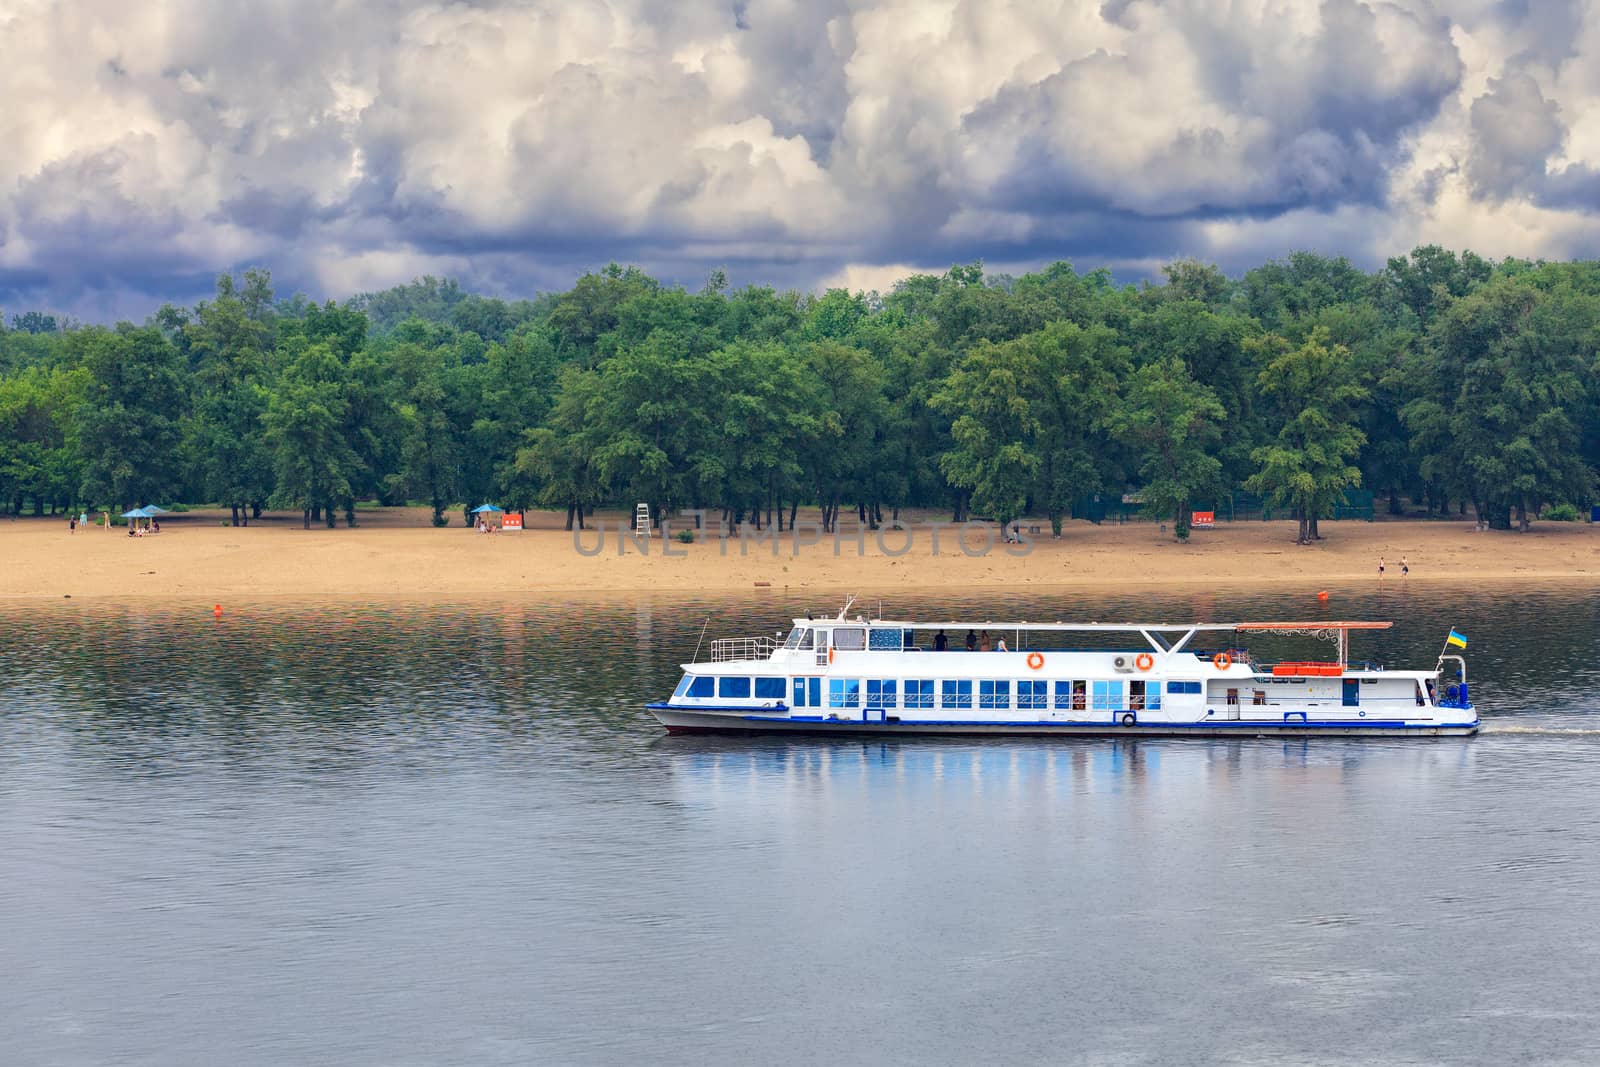 A river tram runs along the banks of the Dnipro against the backdrop of a deserted beach in anticipation of an impending thunderstorm. by Sergii